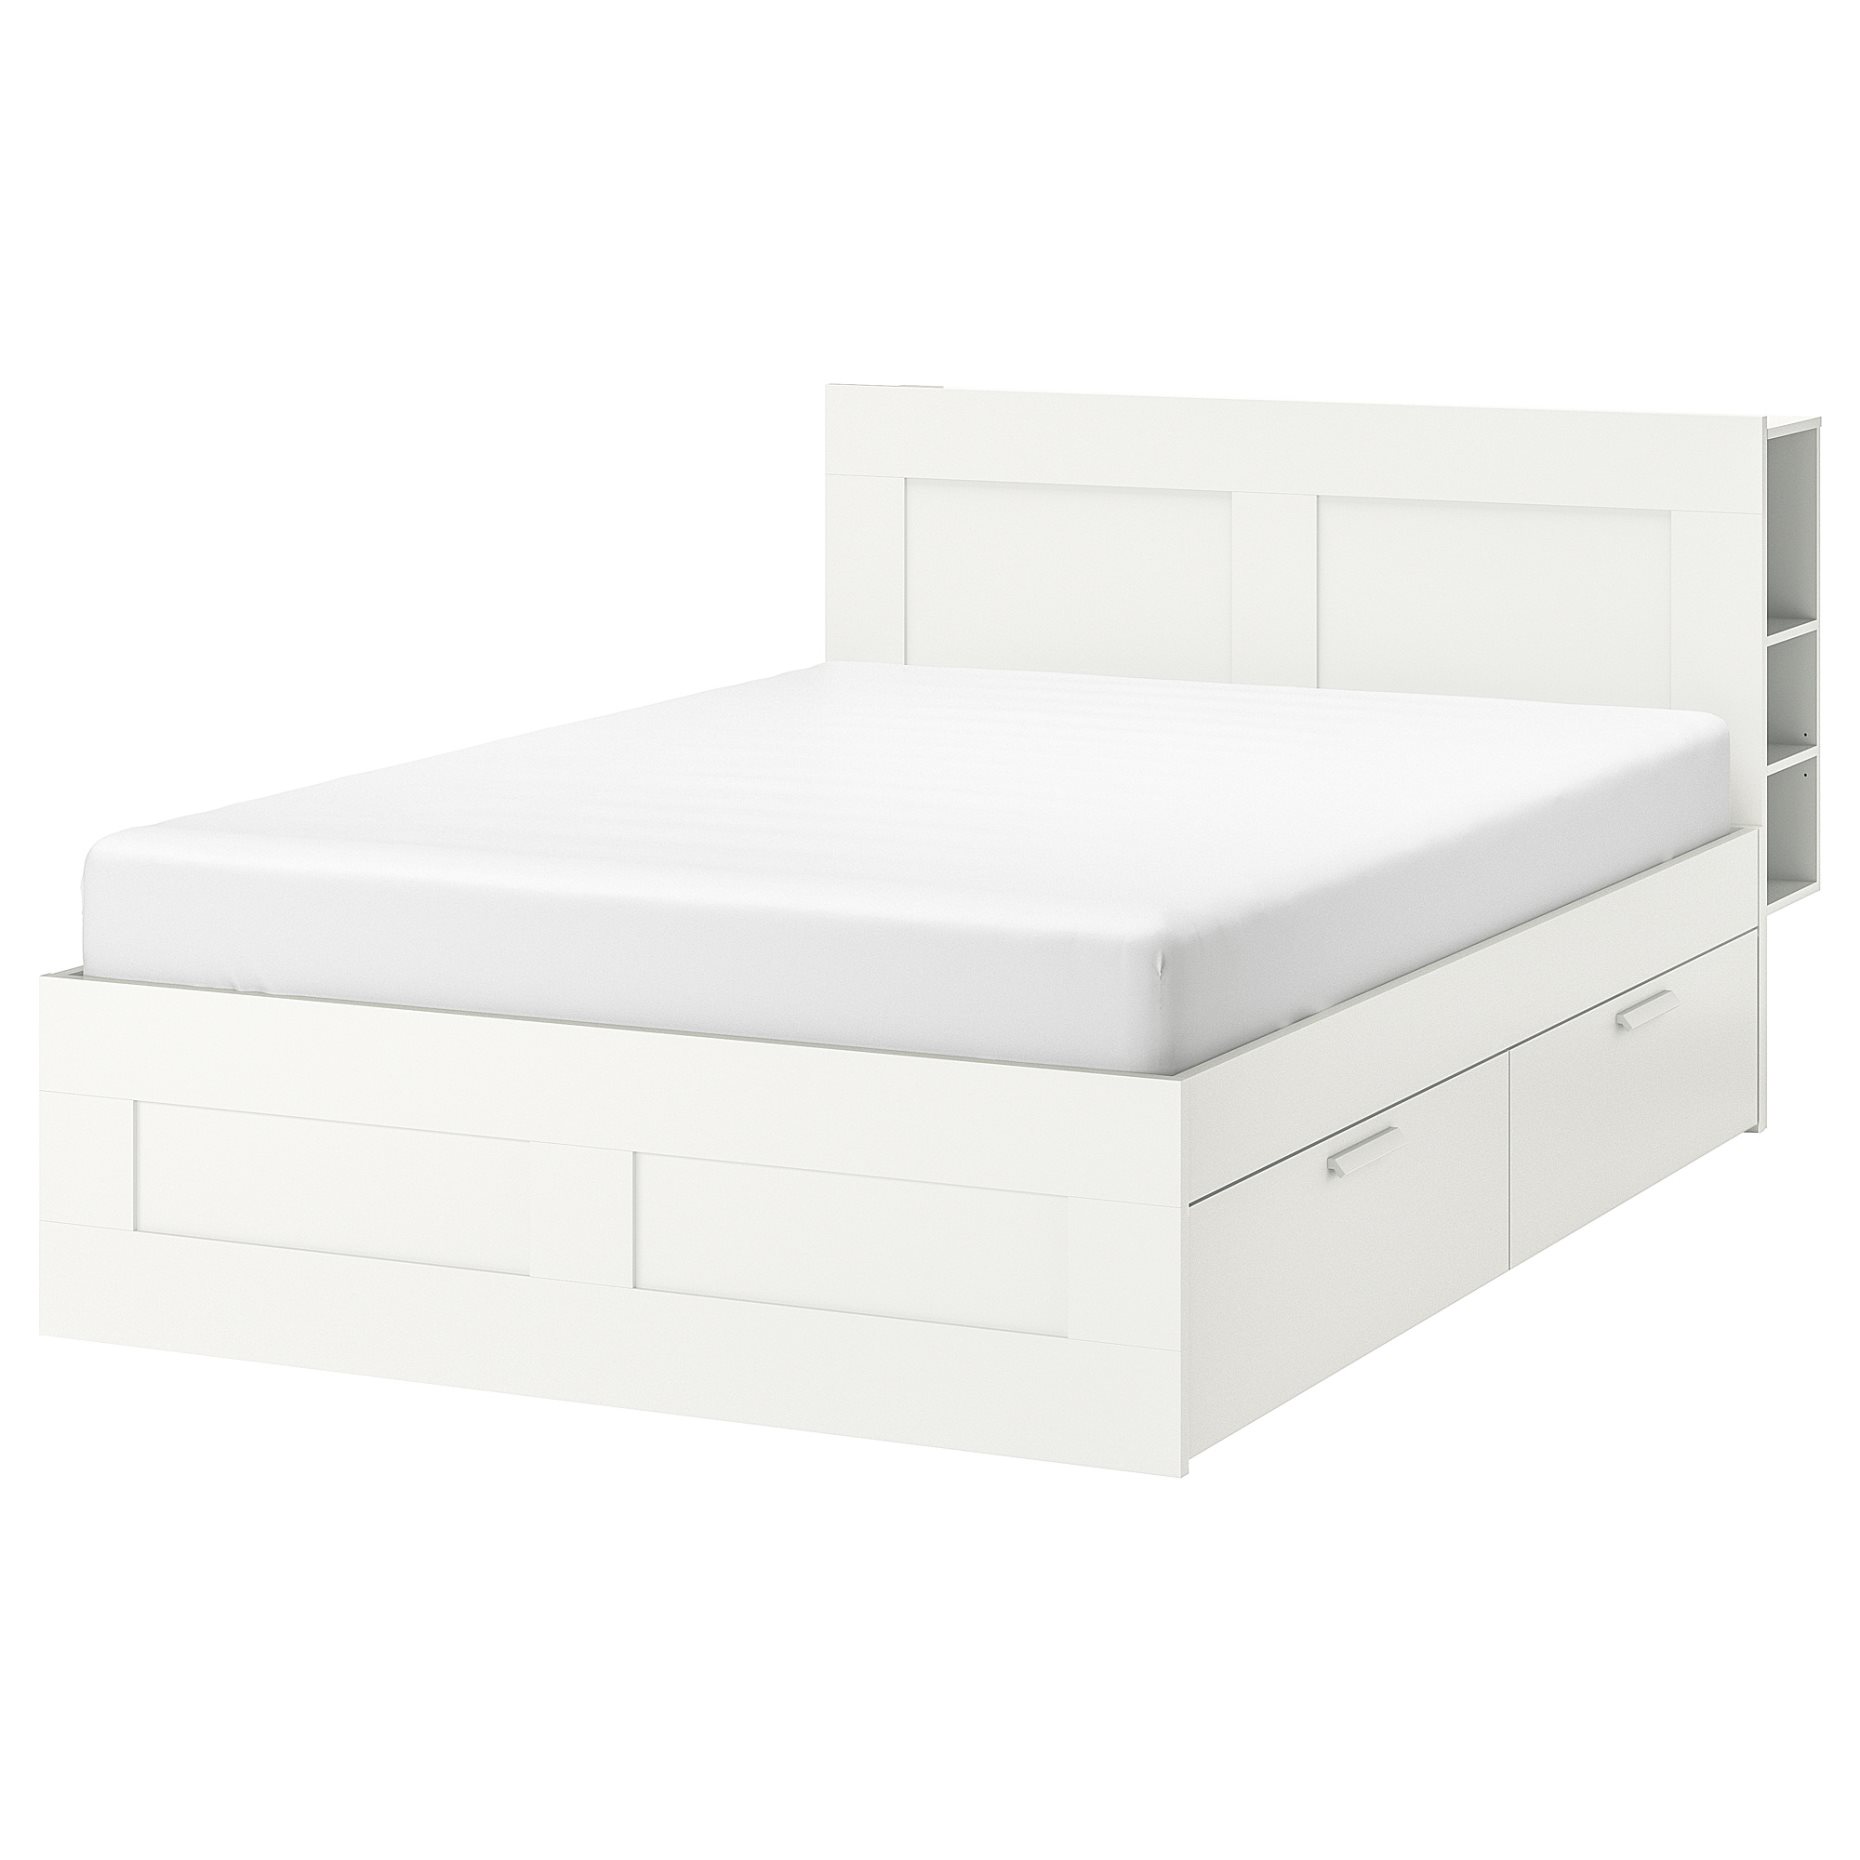 BRIMNES, bed frame with storage and headboard, 160X200 cm, 590.991.55